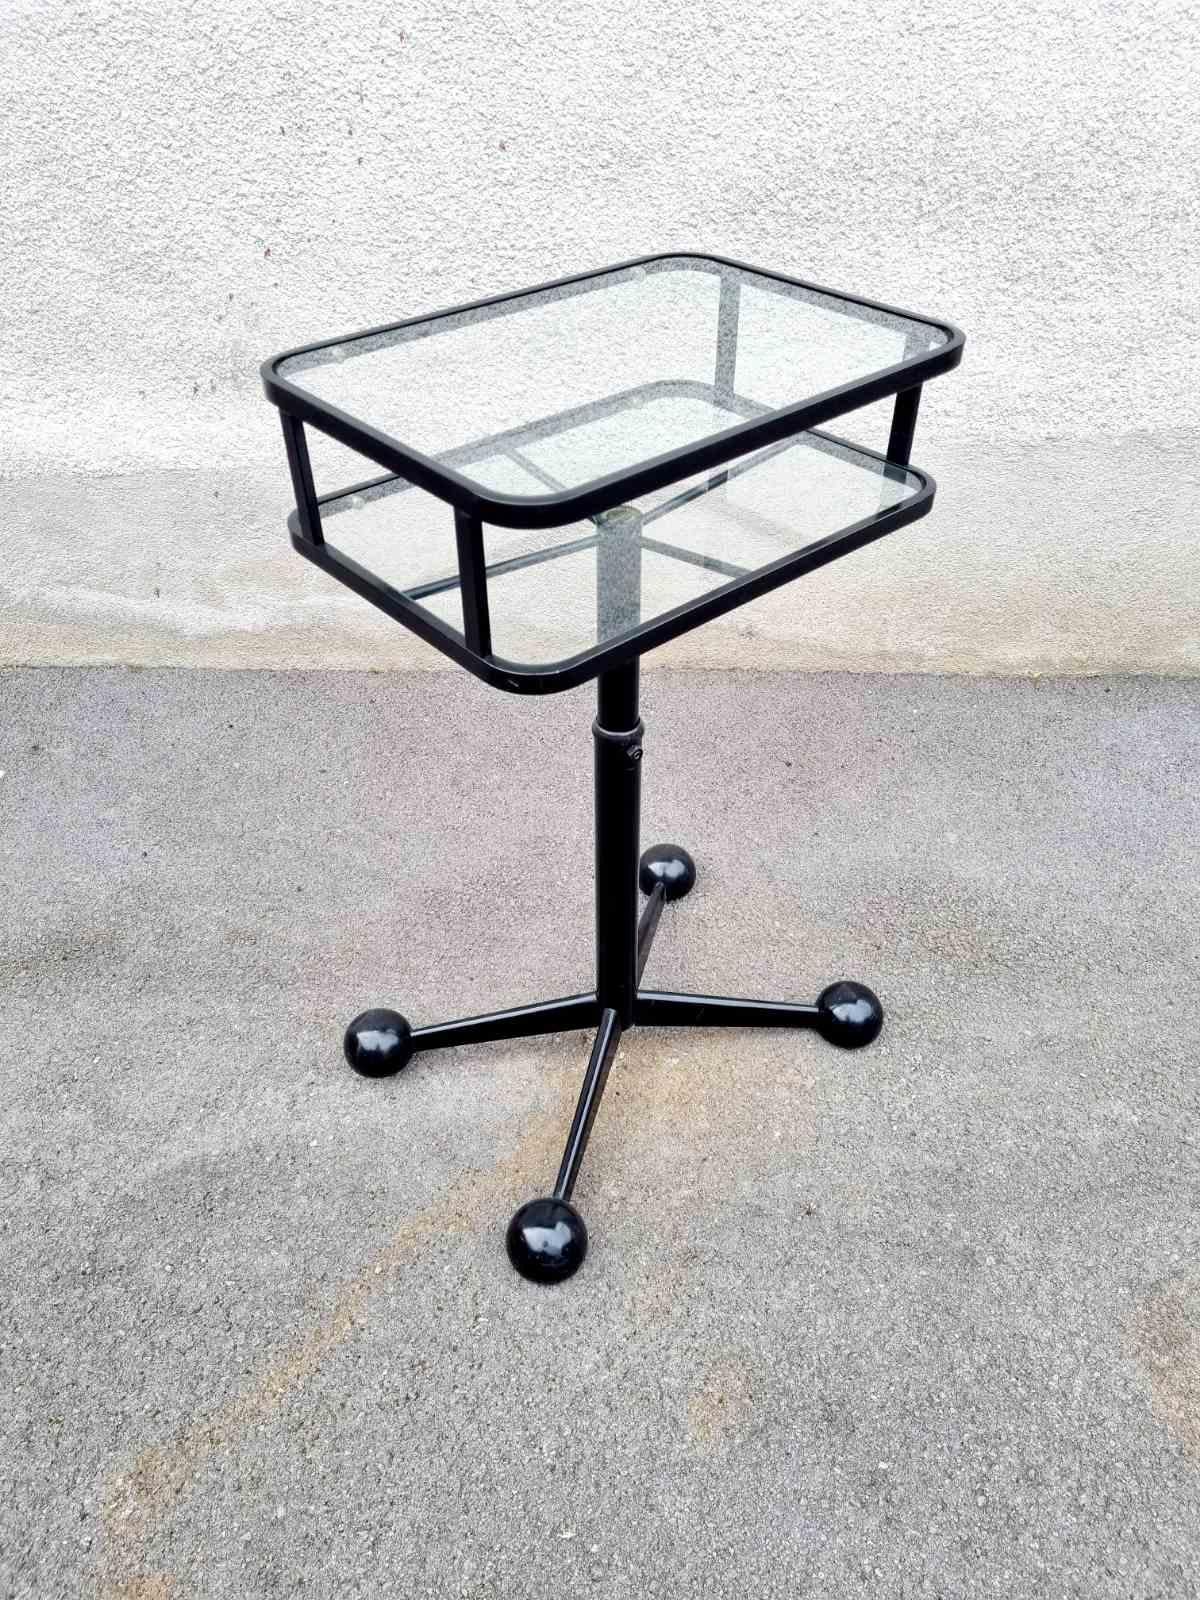 Rare Italian Mid Century  TV Stand / Side Table / End Table was made in Italy in '70s and produced by Arredamenti Allegri Parma.

This Table is made of glass and black metal frame. The Table is on wheels and it is adjustable. The Table is labeled,